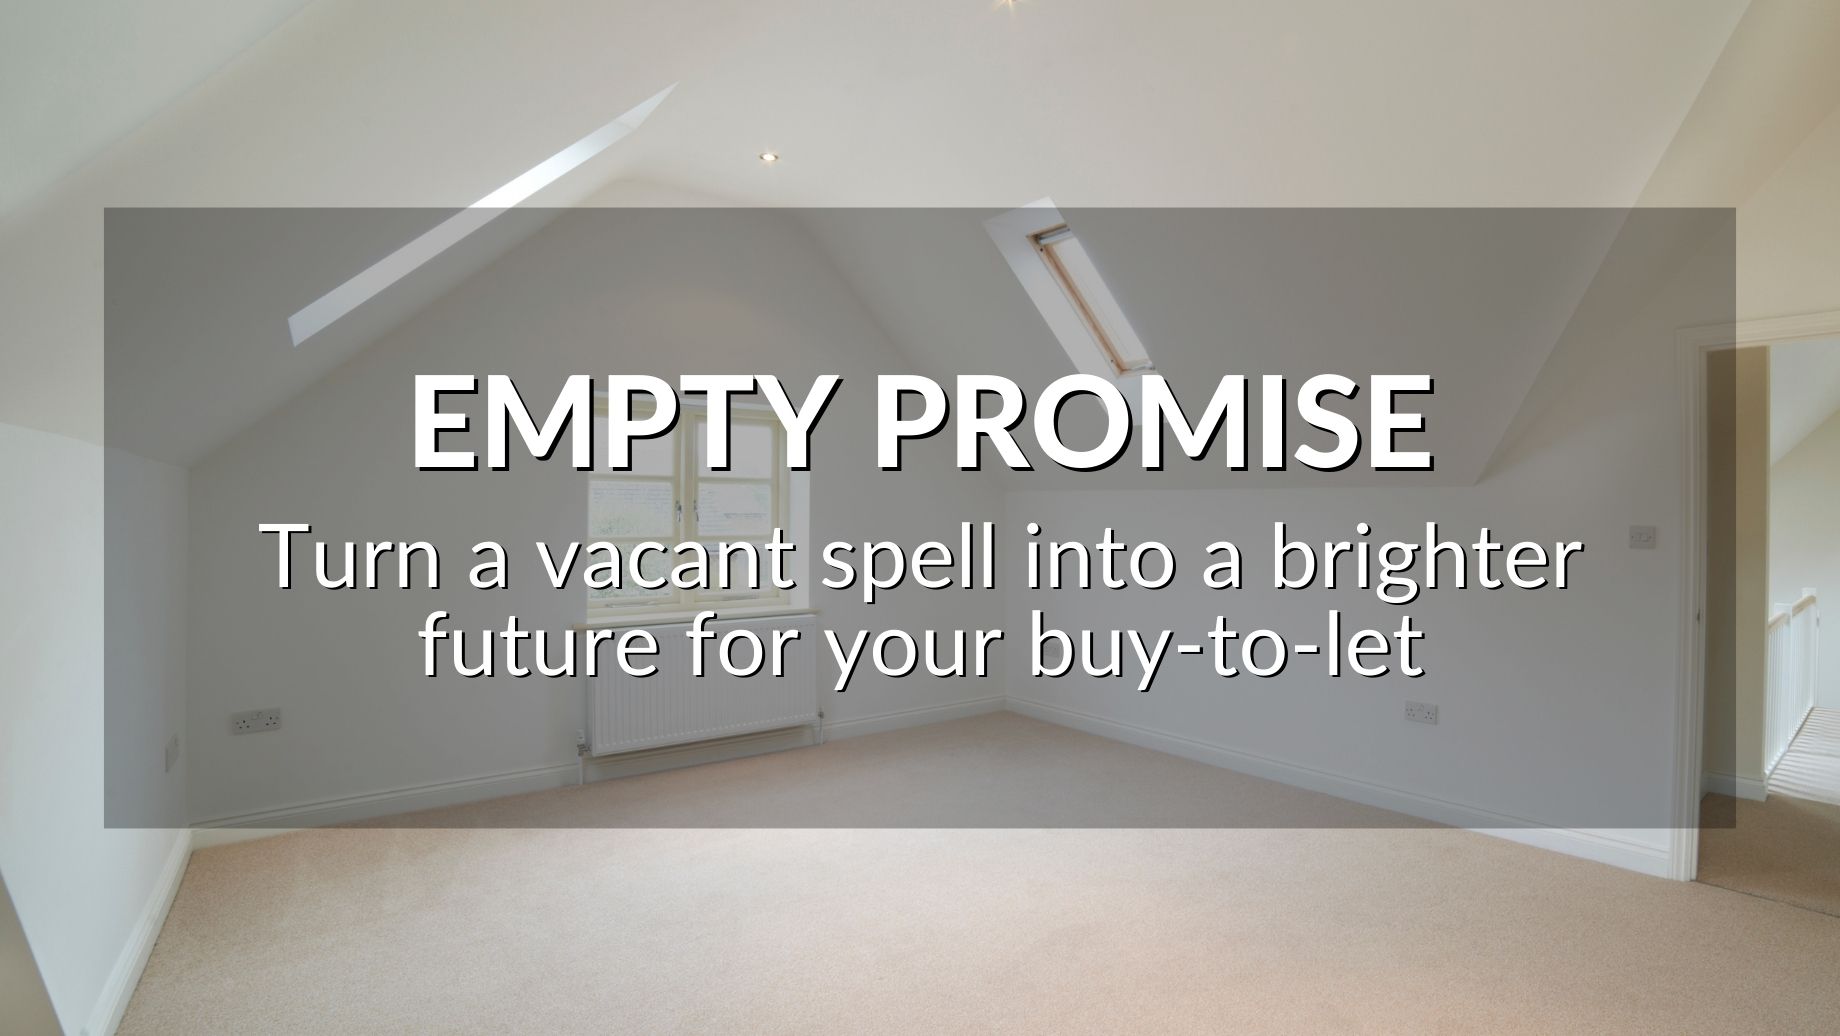 Empty promise: turn a vacant spell into a brighter